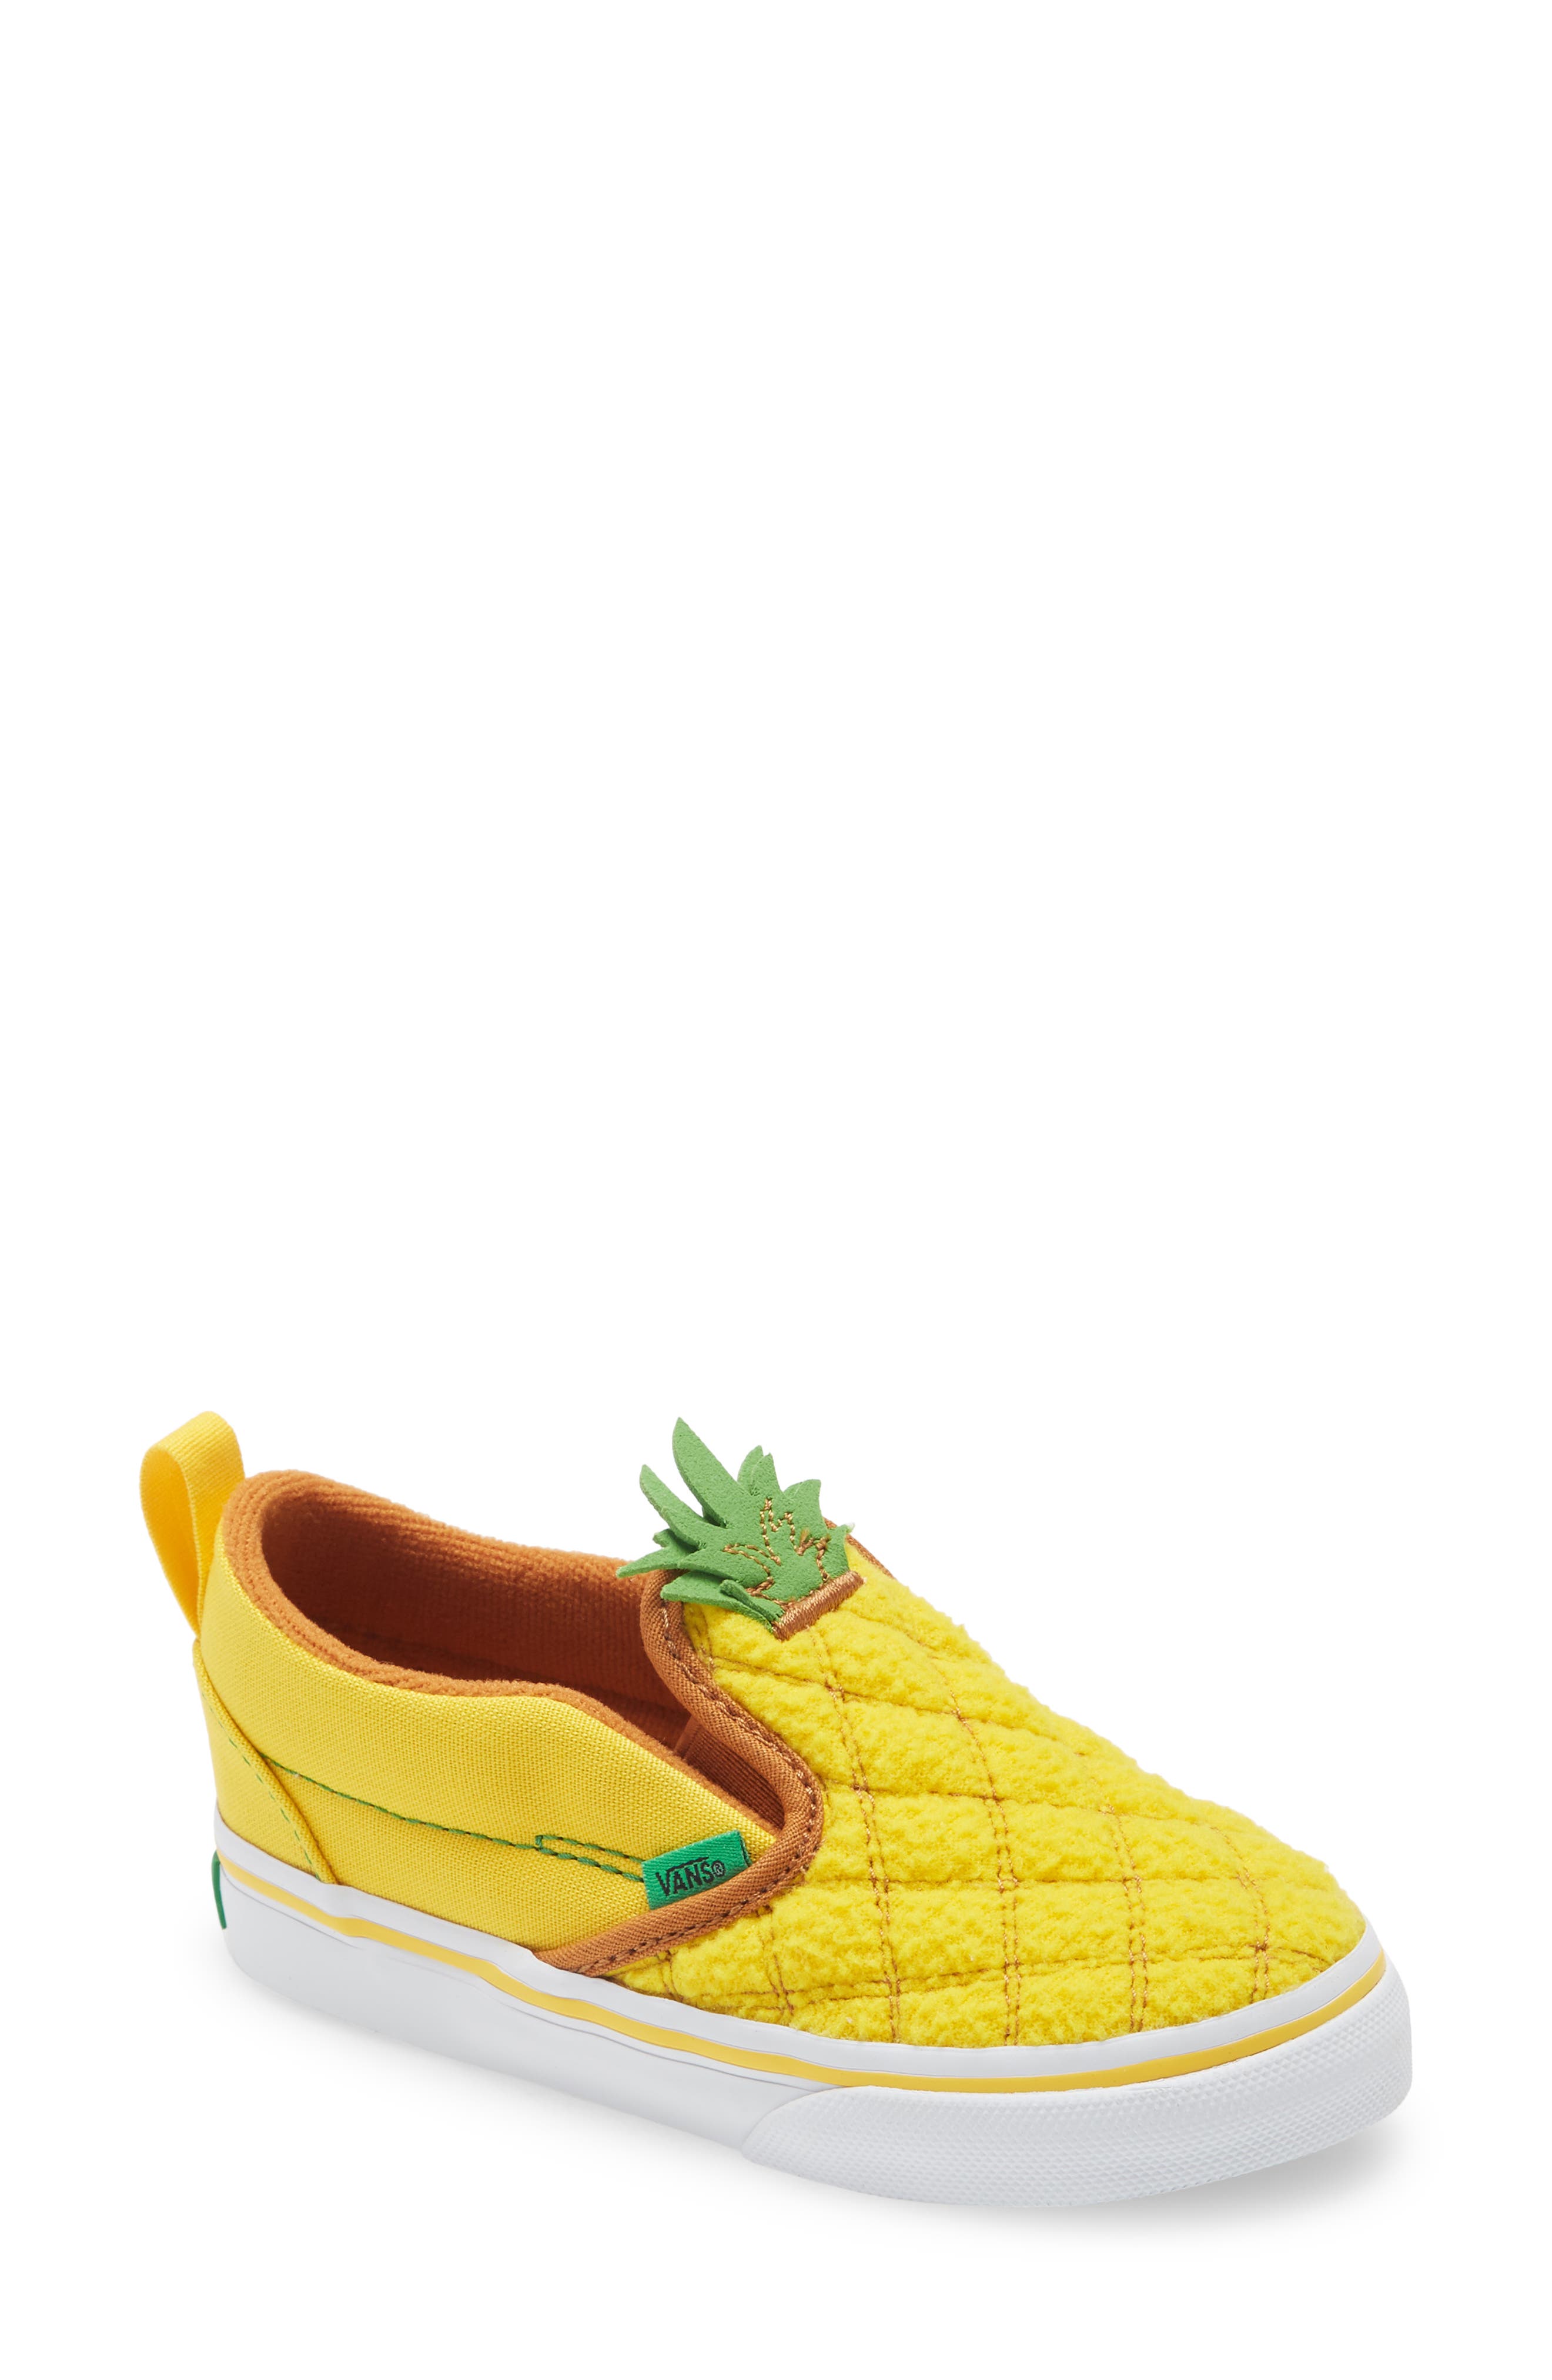 yellow vans for toddlers